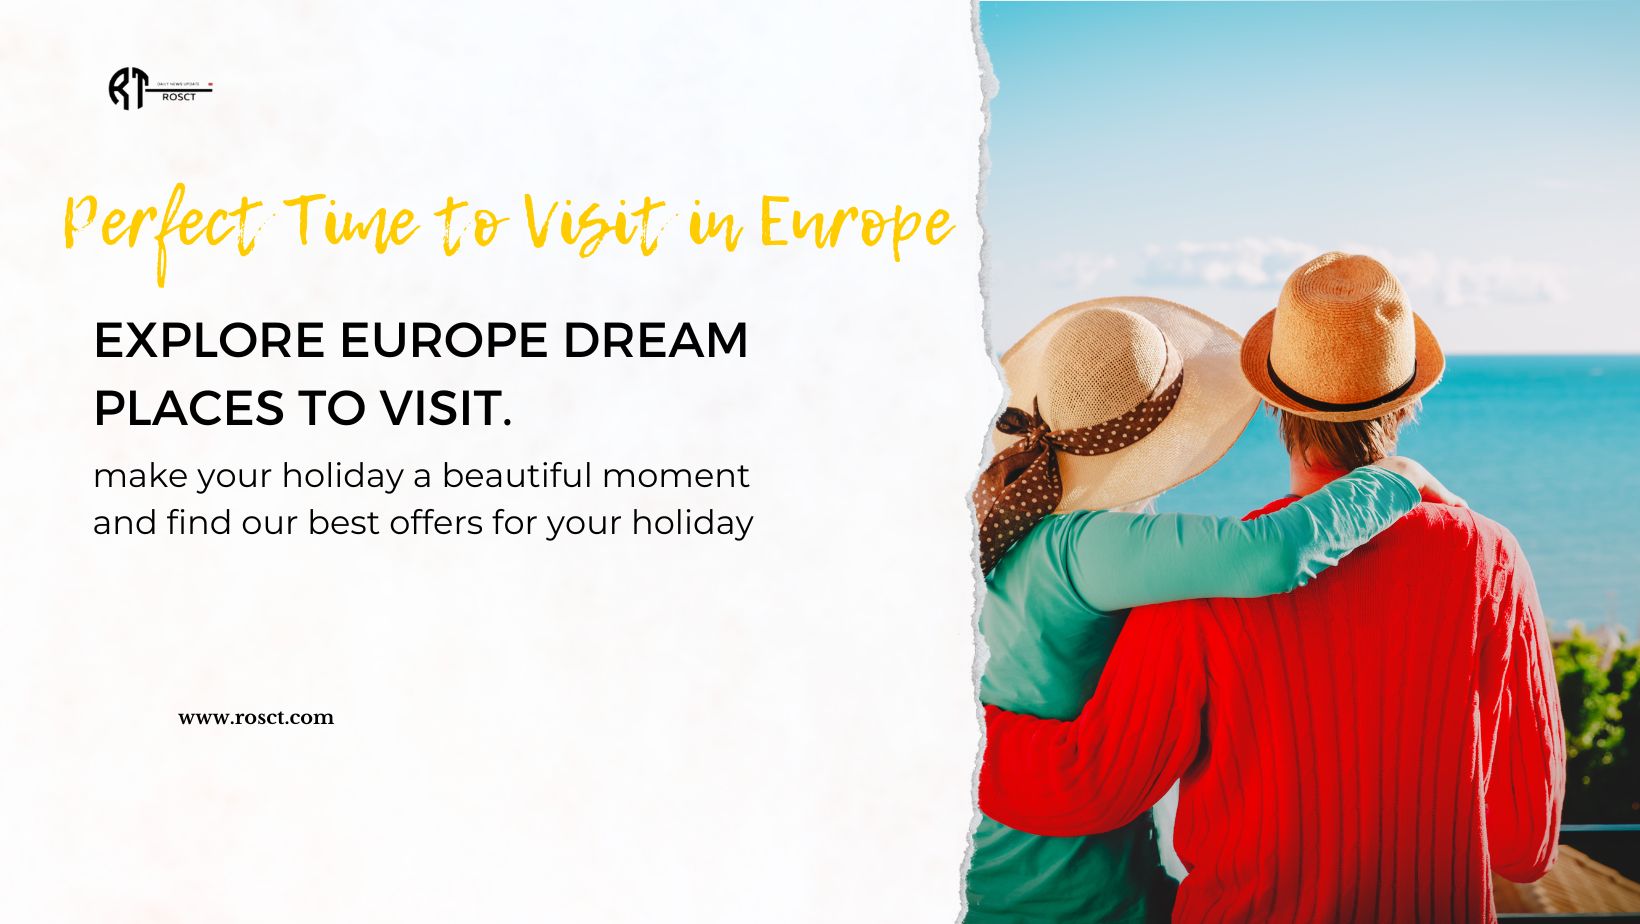 Perfect Time to Visit in Europe